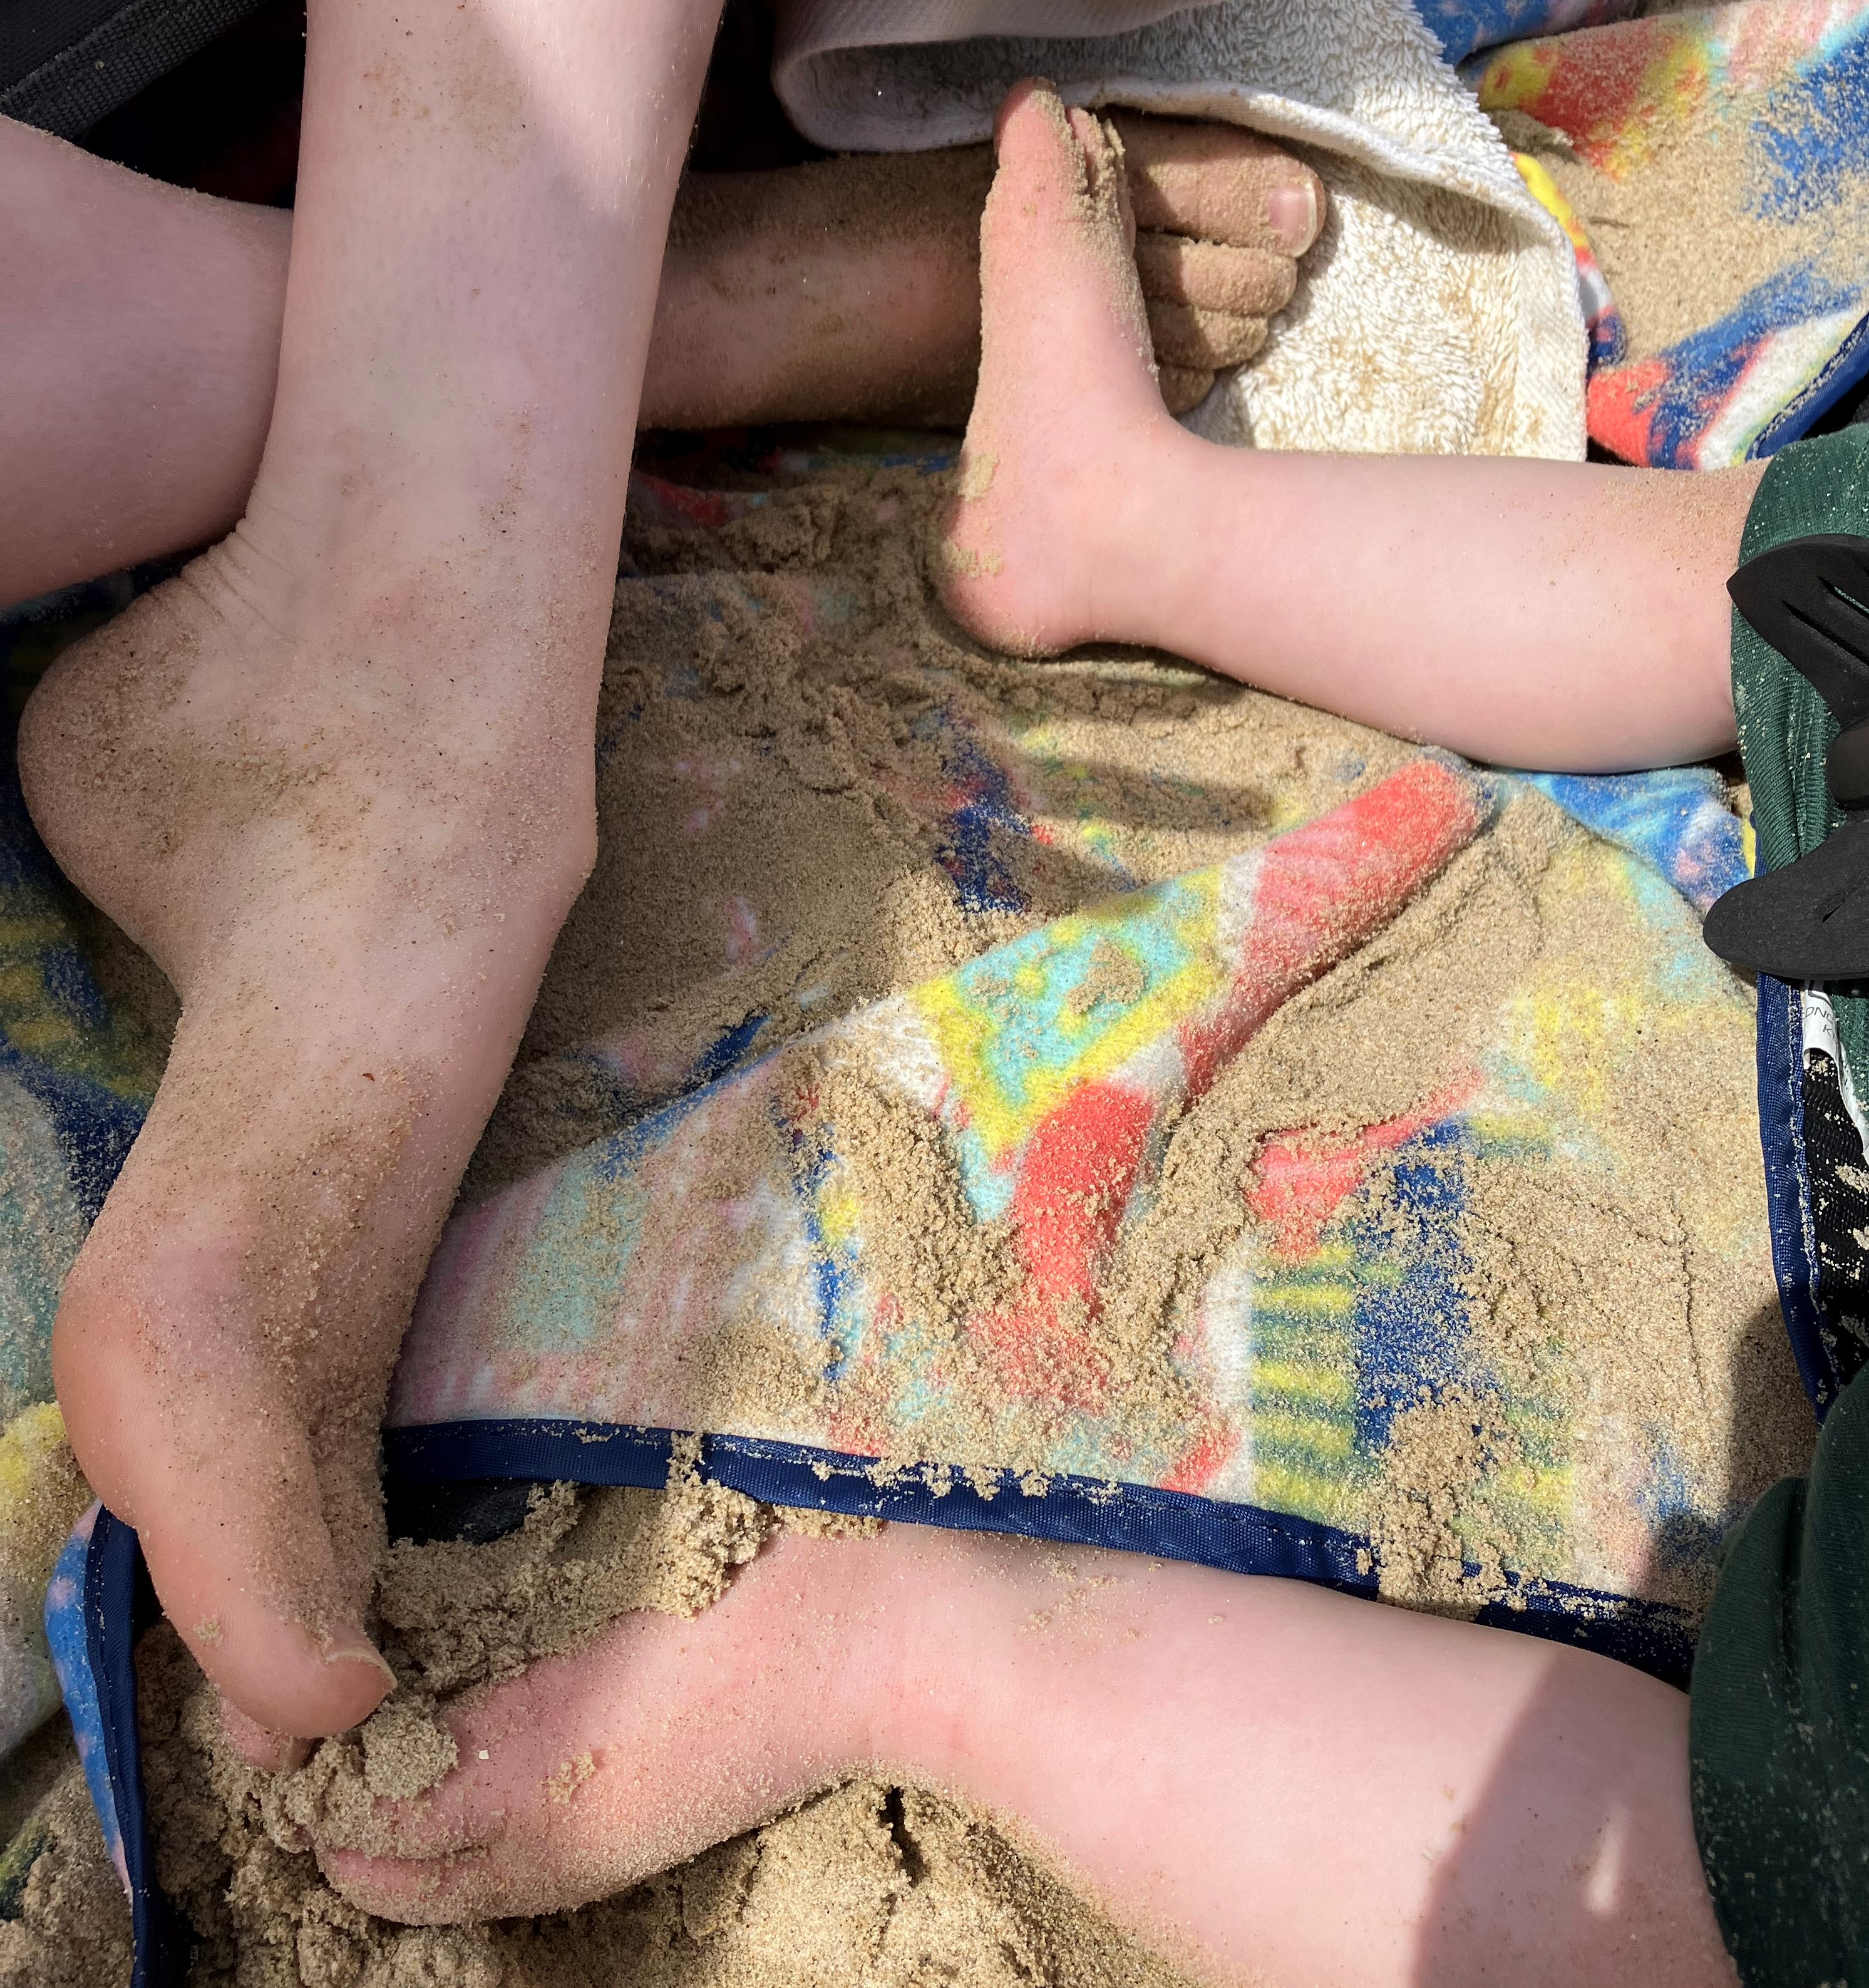 a young person's foot and baby feet on a beach towel